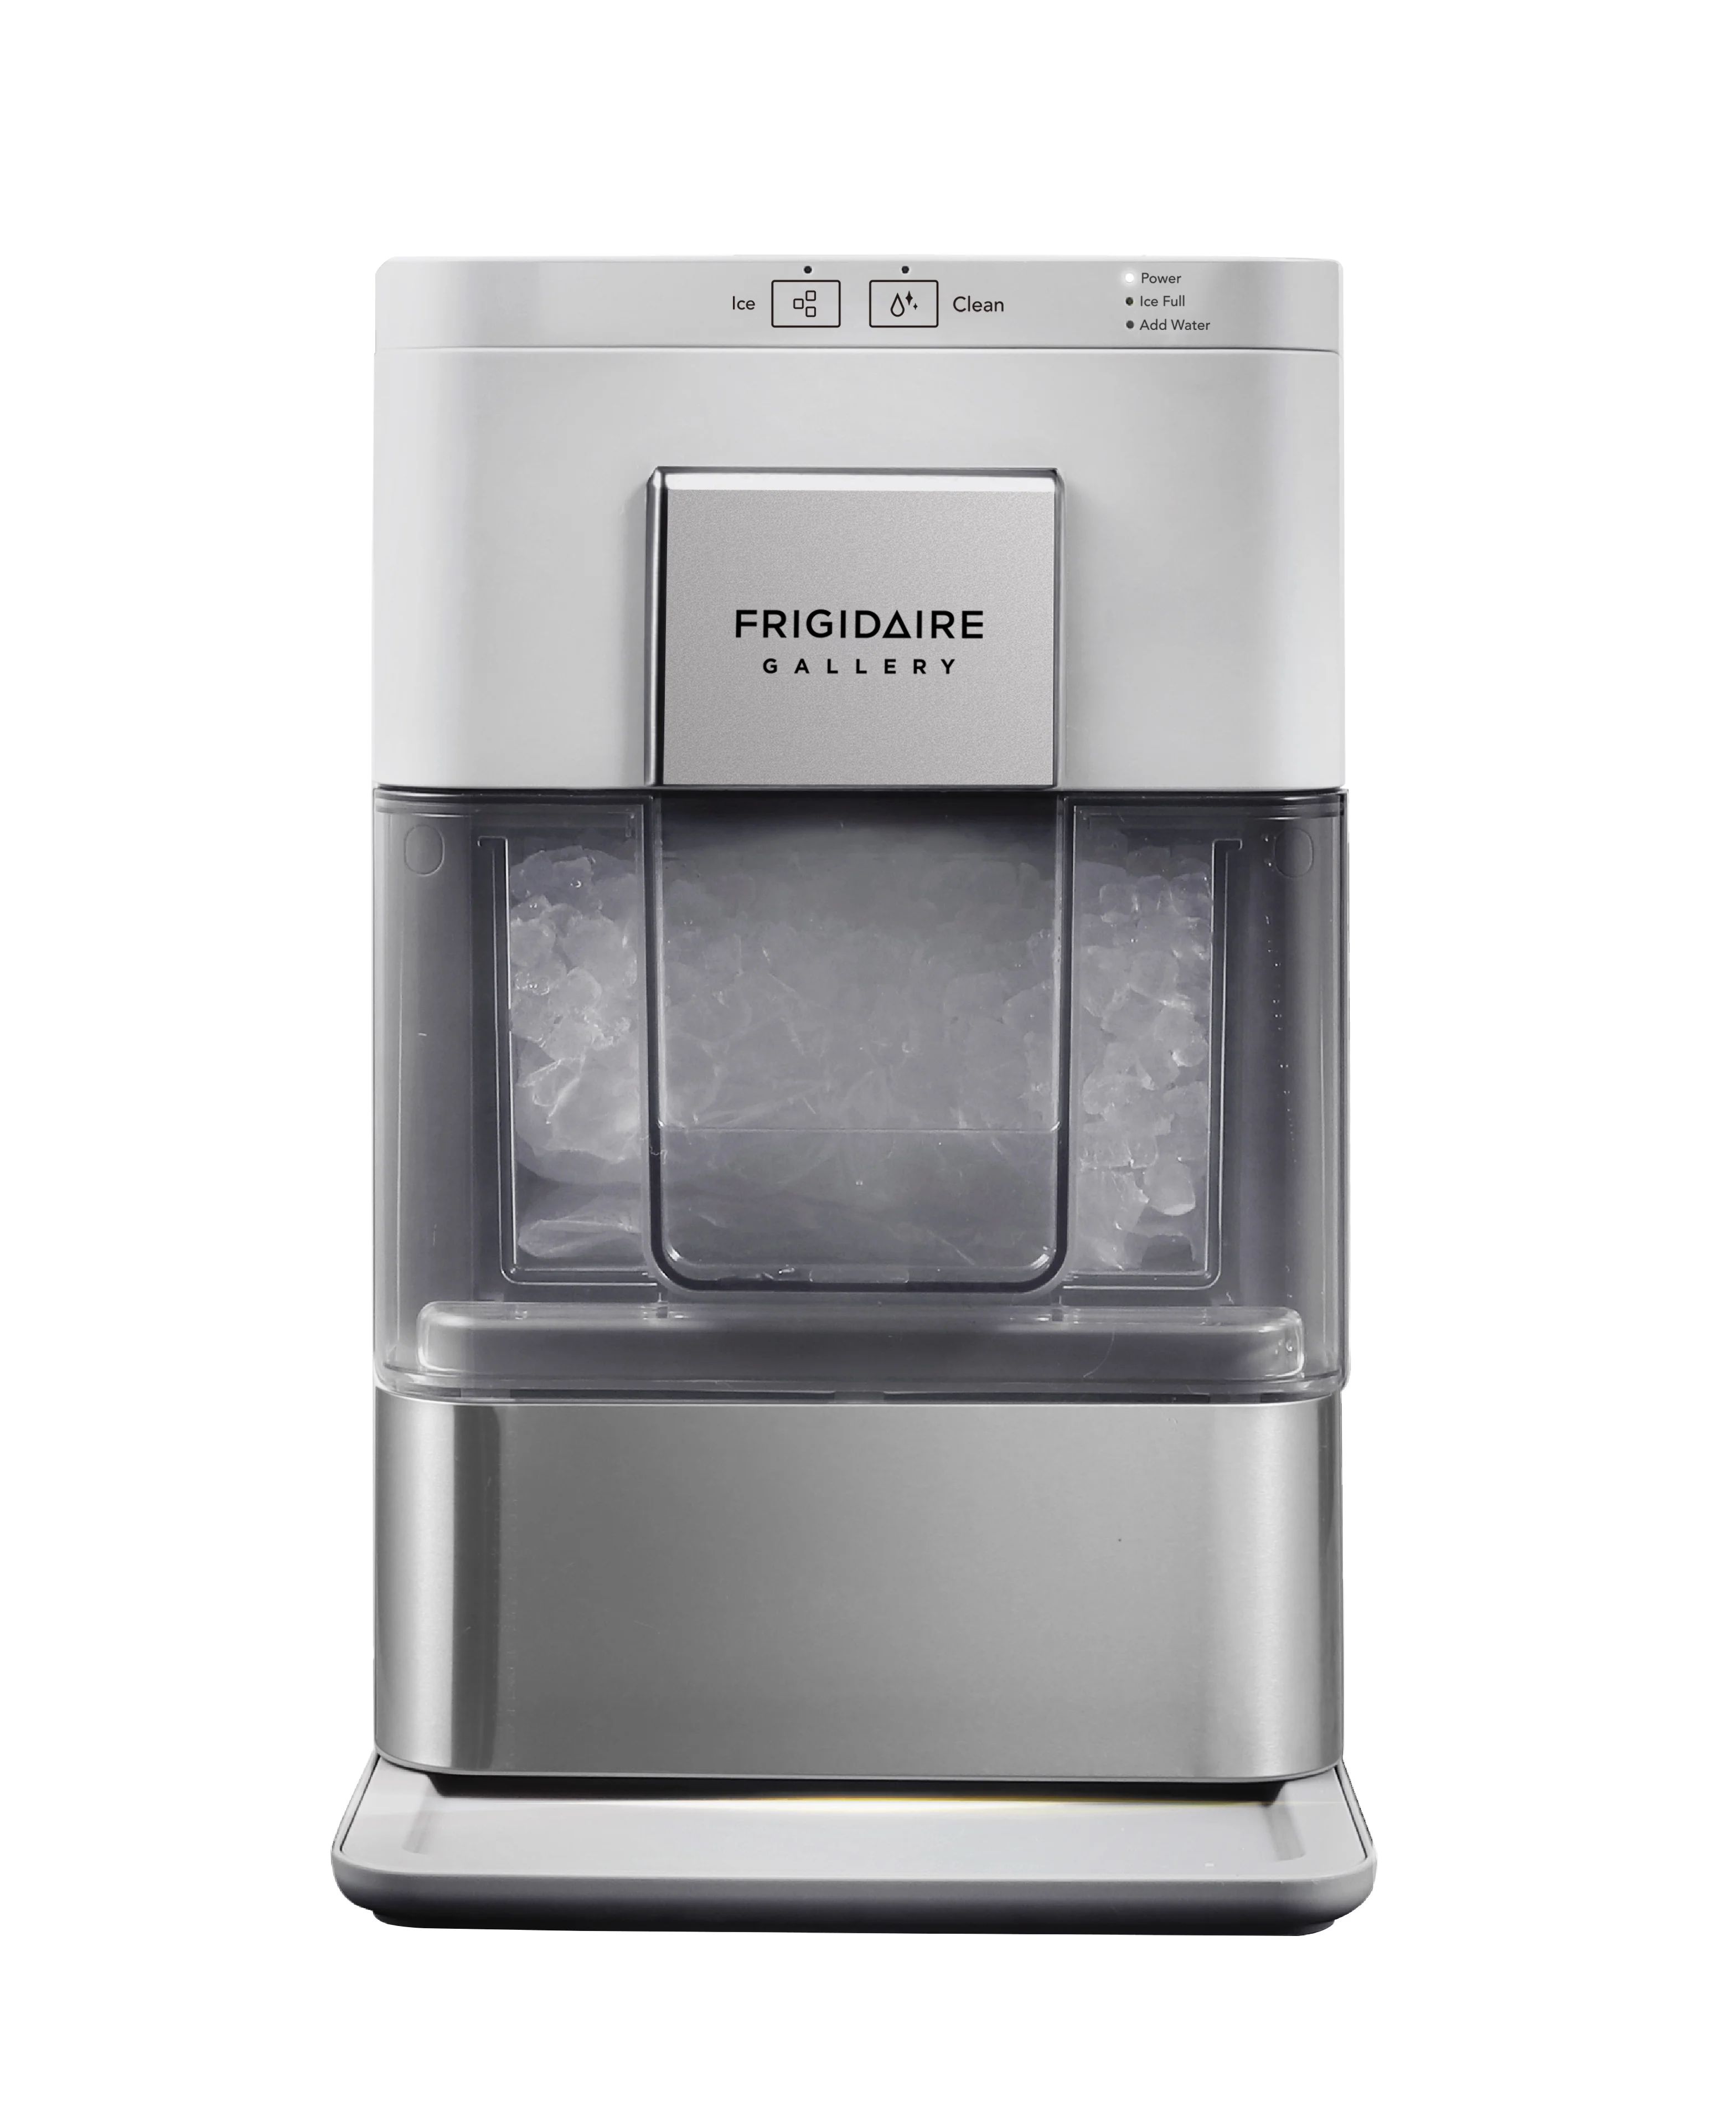 Frigidaire Gallery 44 lbs. Touchscreen Nugget Ice Maker - Stainless Steel Accent, EFIC256, Grey | Walmart (US)